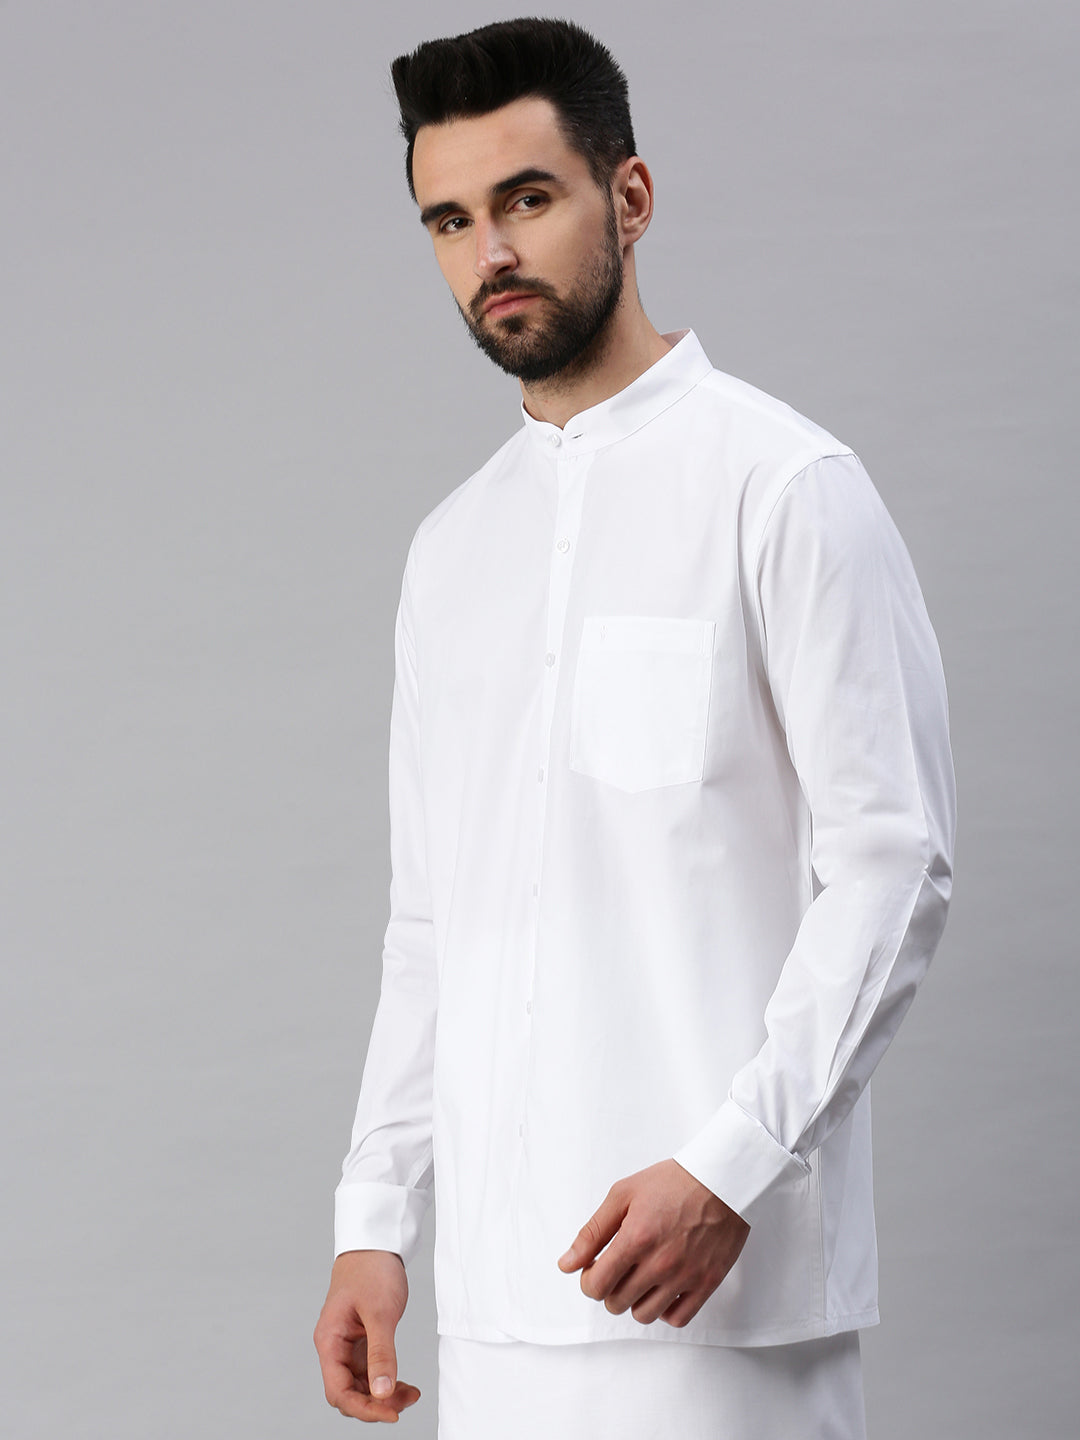 Mens 100% Cotton White Shirt Full Sleeves Plus Size Chinese Collar-Side view